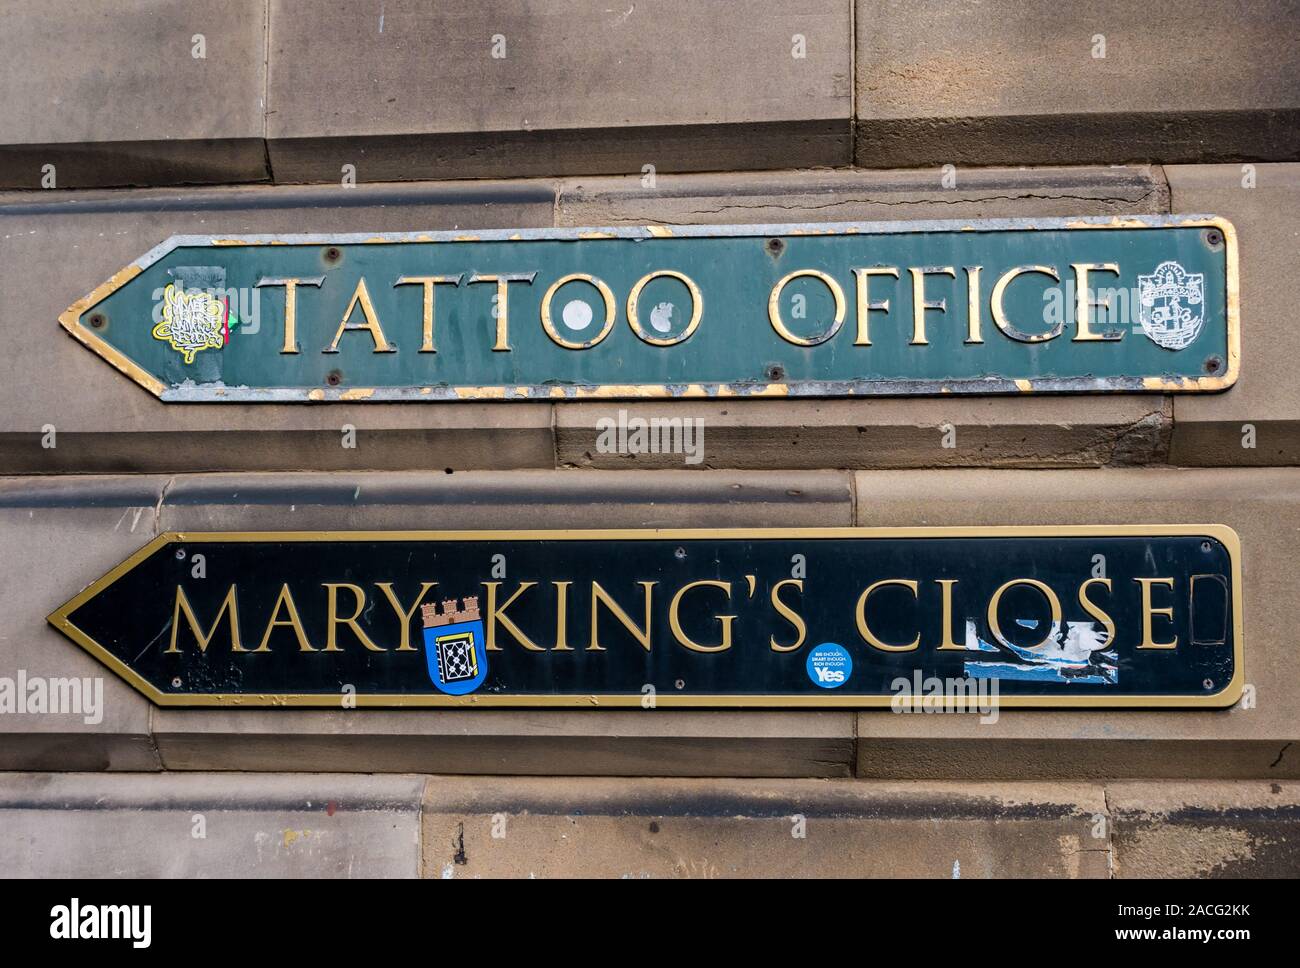 Signs for Mary King's Close & Military Tattoo Office on sandstone wall, Edinburgh, Scotland, UK Stock Photo